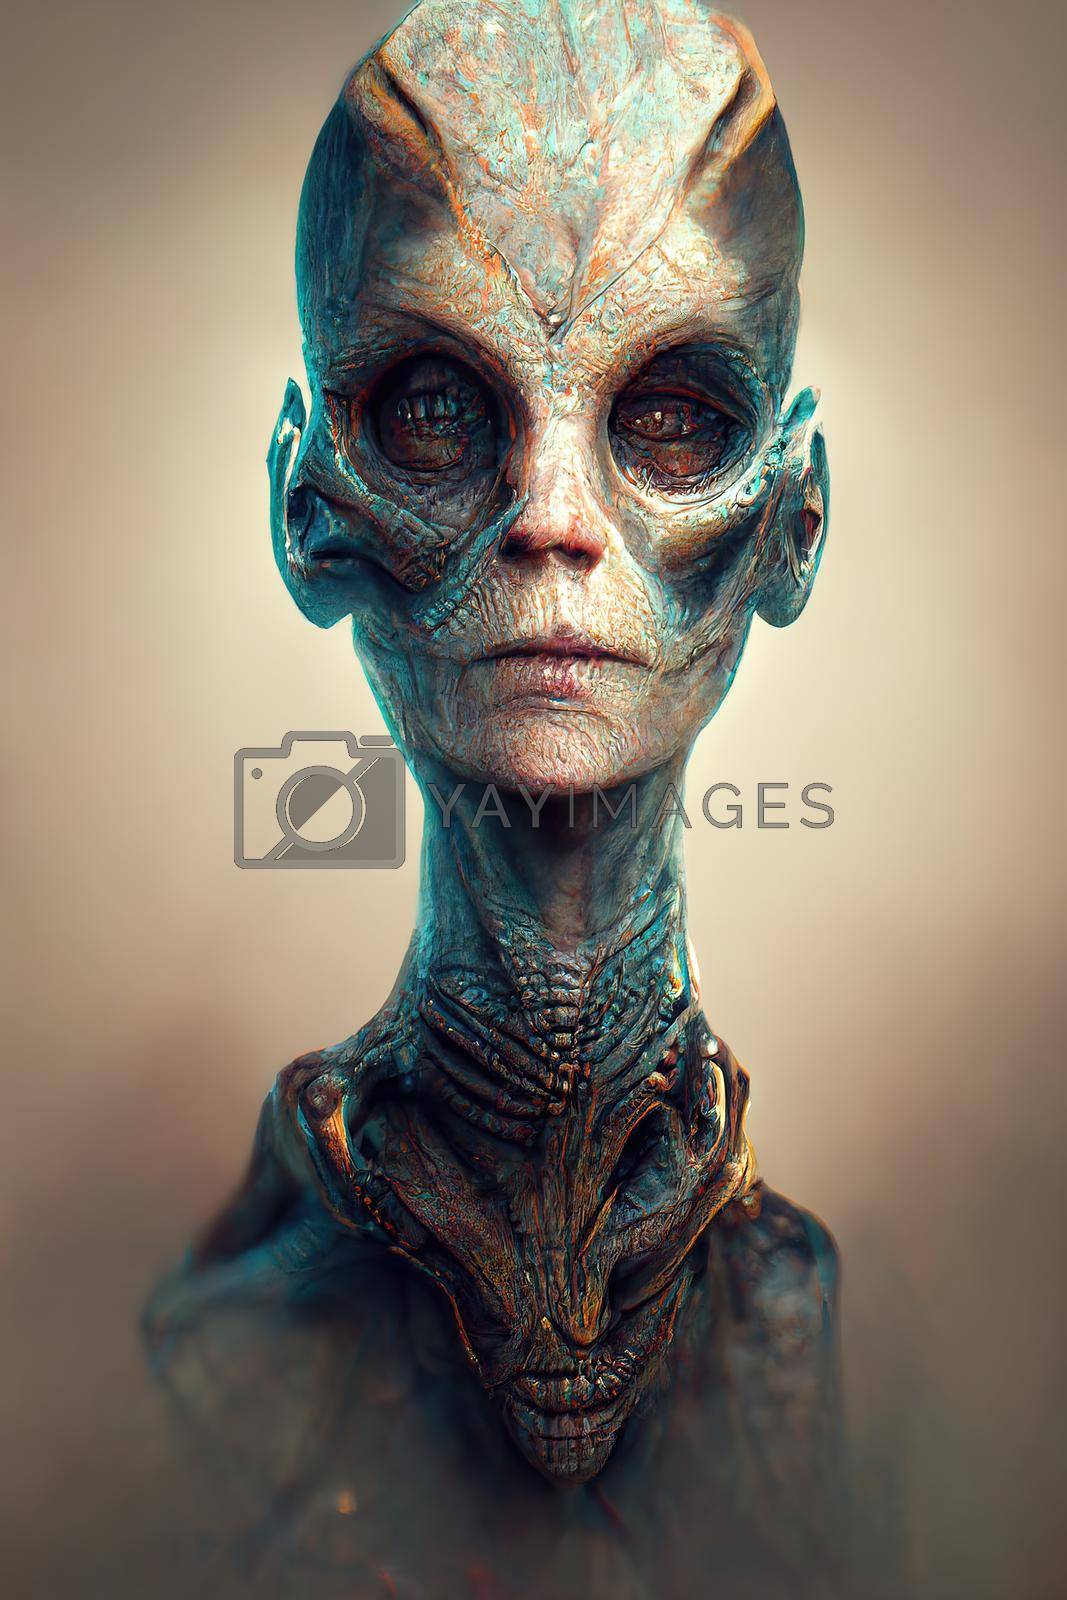 Royalty free image of Portrait of an alien male extraterrestrial, 3d render by Farcas